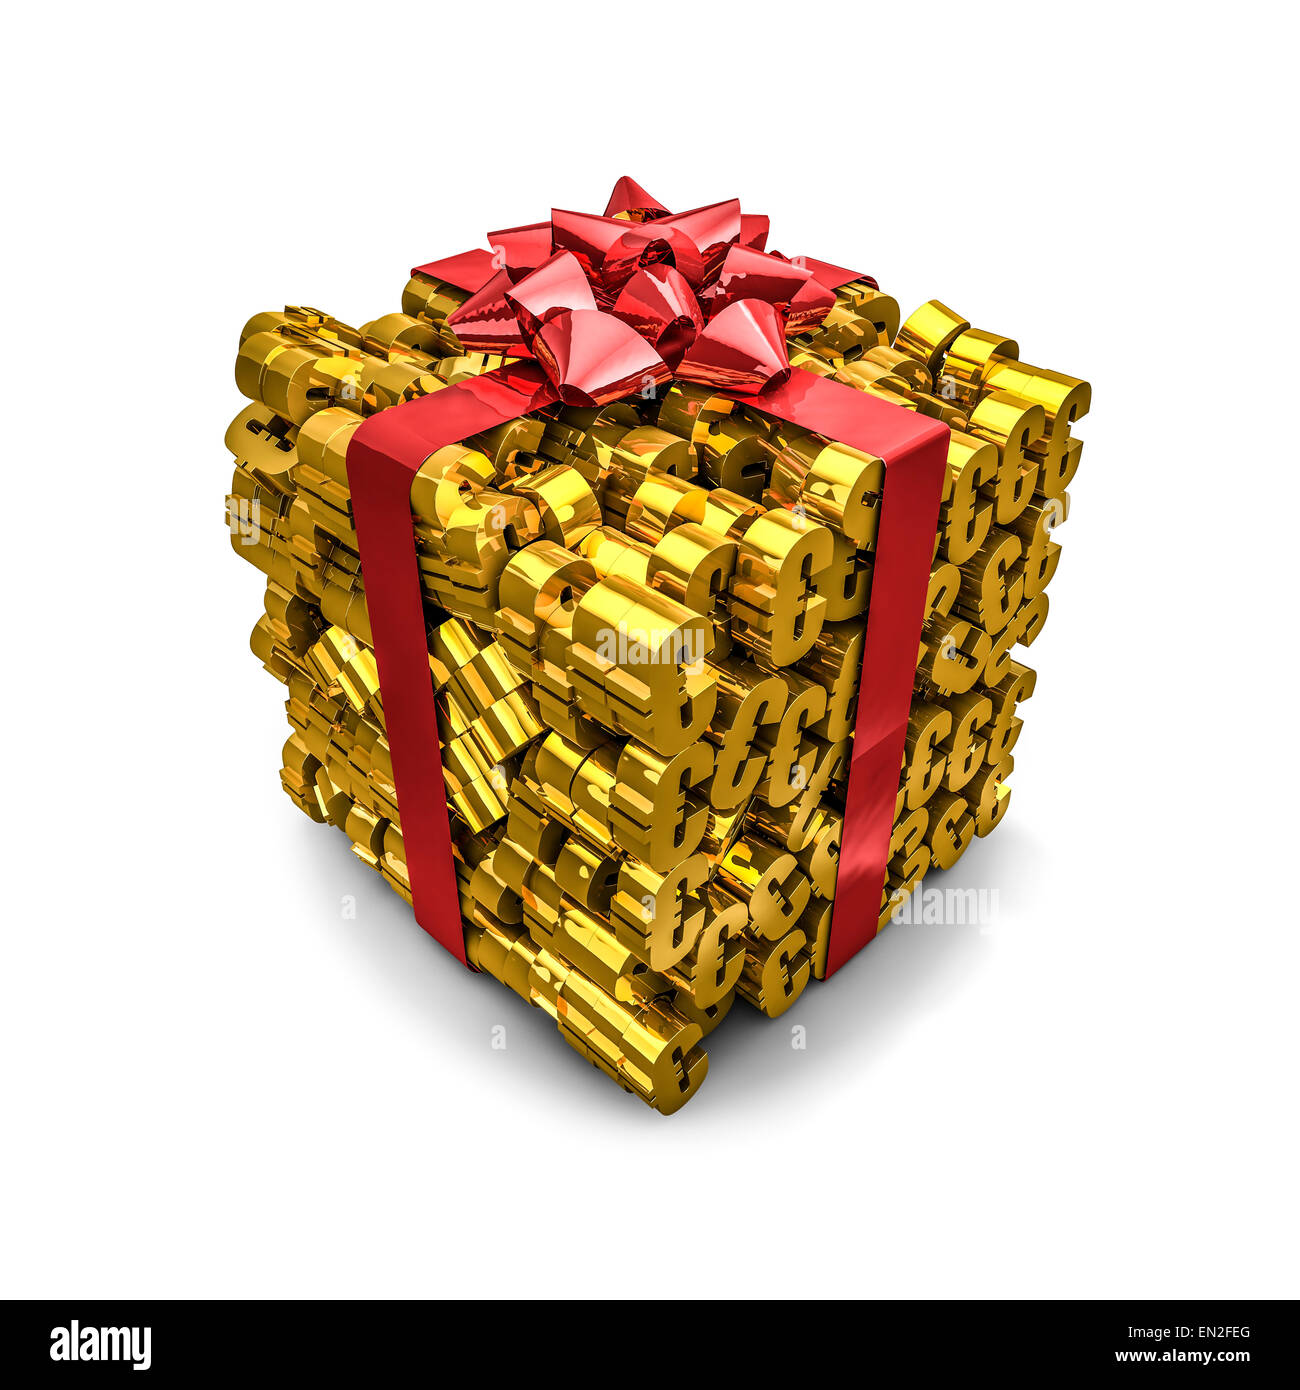 3D render of gift wrapped euro symbols Stock Photo